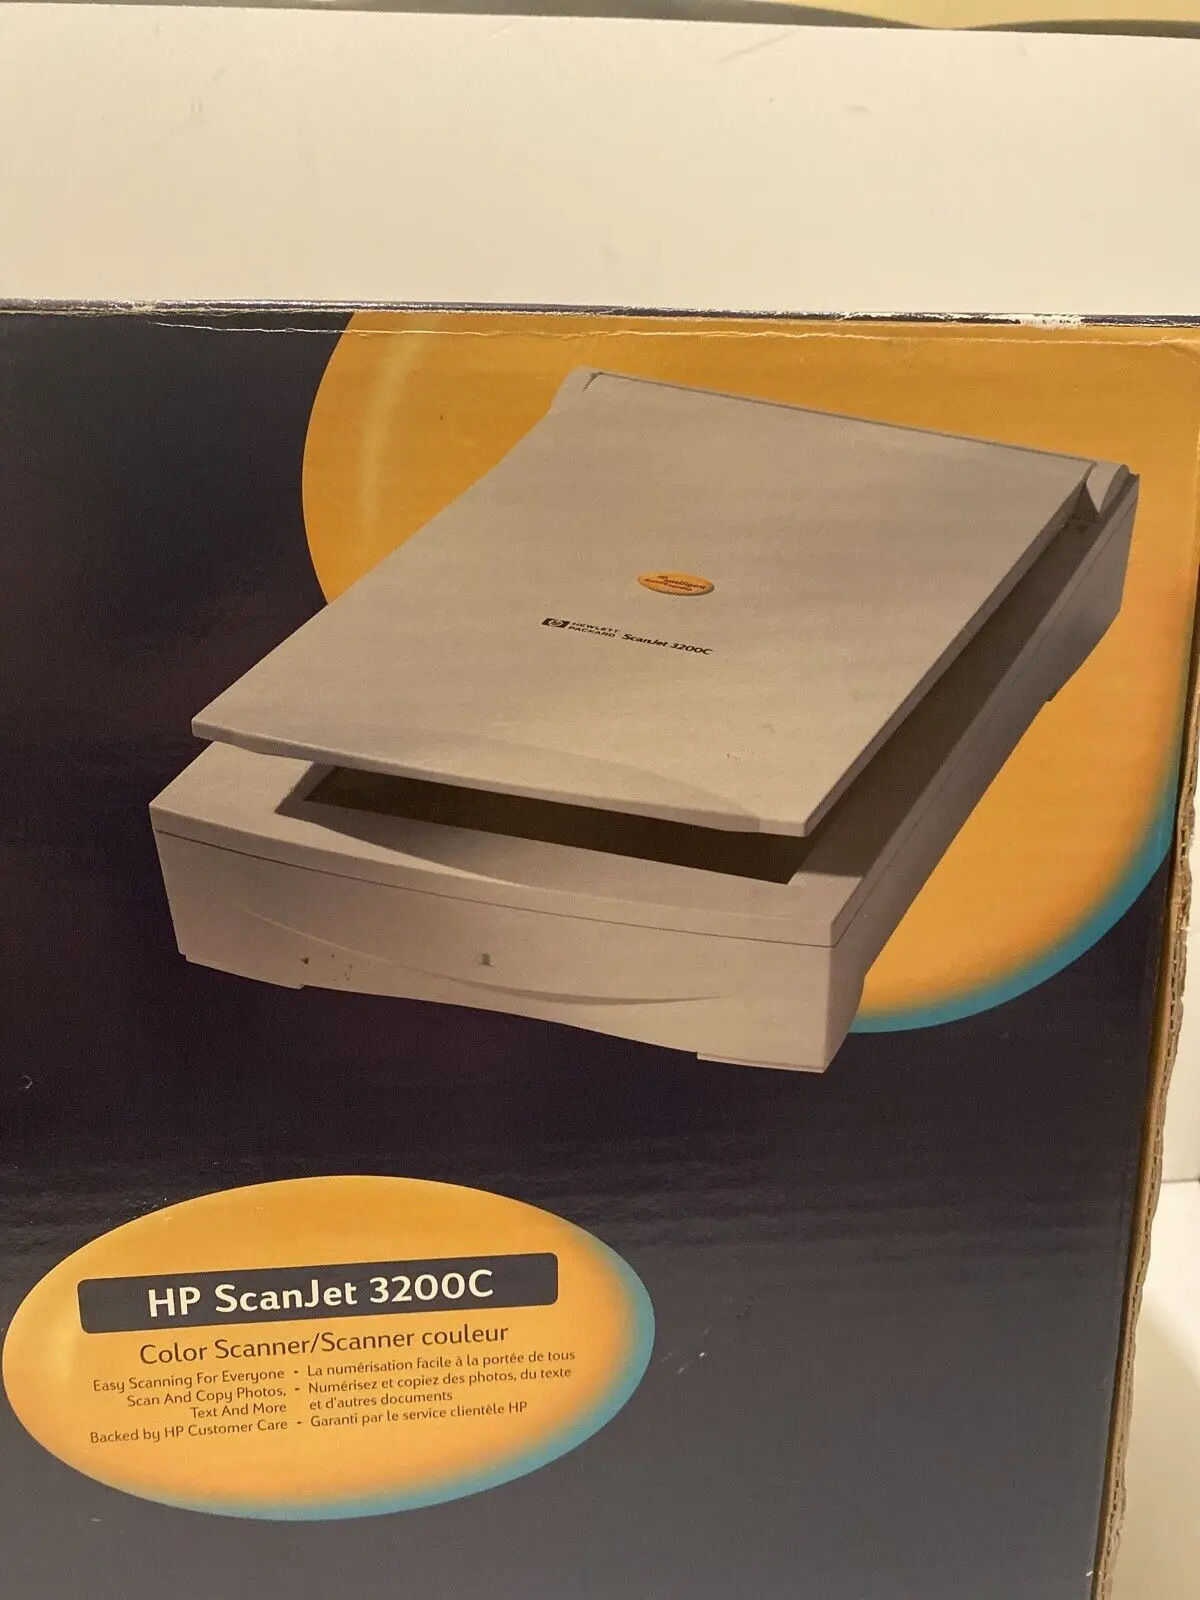 hewlett packard scanjet 3200c - What is the price of HP Scanjet 200 flatbed photo scanner in Pakistan